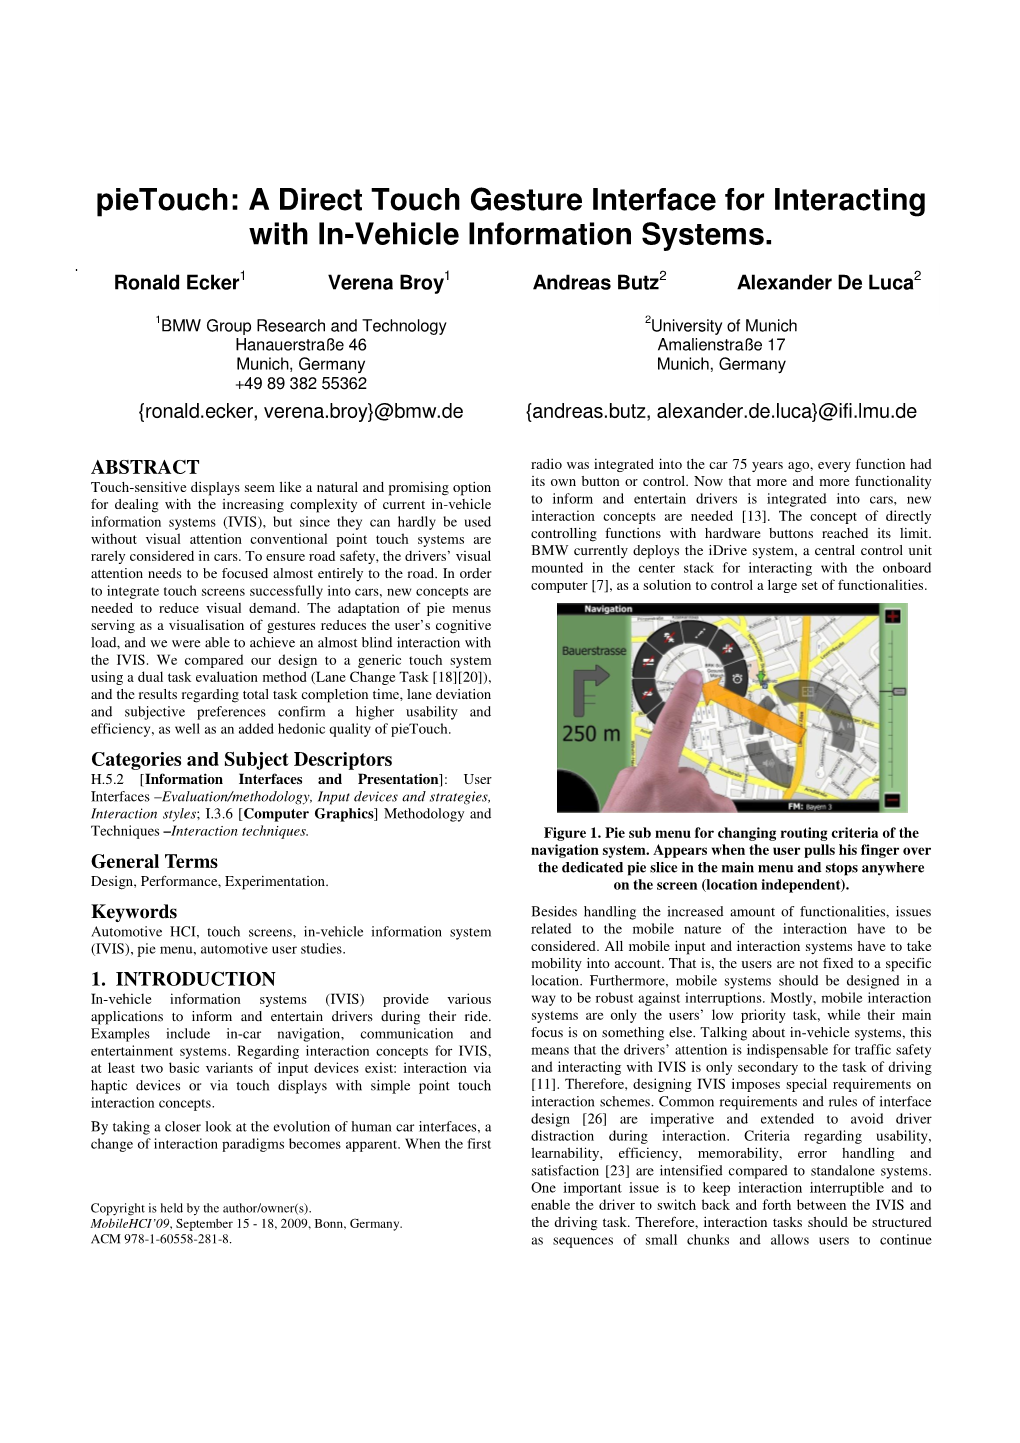 A Direct Touch Gesture Interface for Interacting with In-Vehicle Information Systems